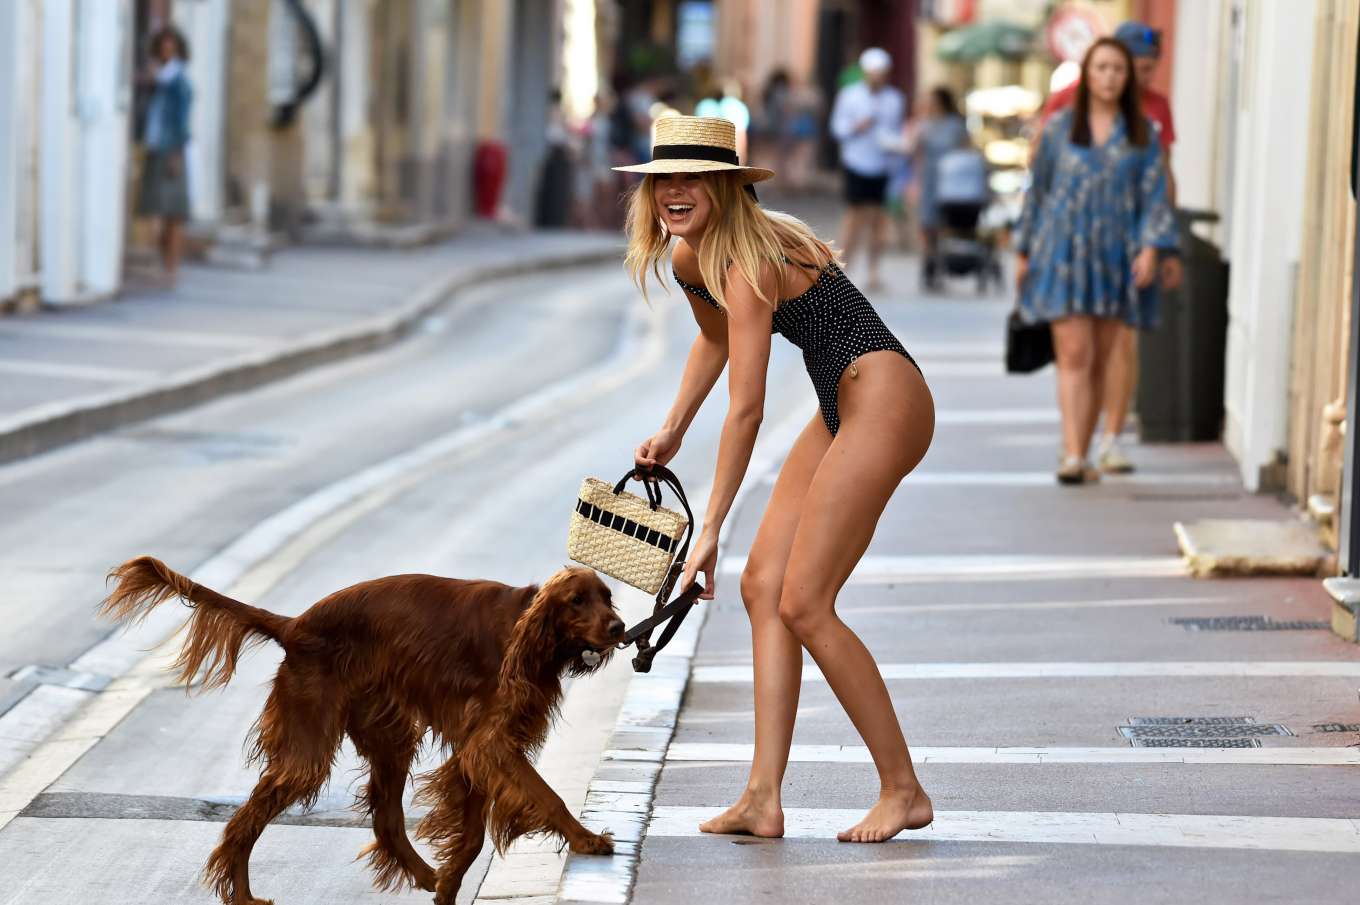 Kimberley Garner in Swimsuit on the streets of St. Tropez